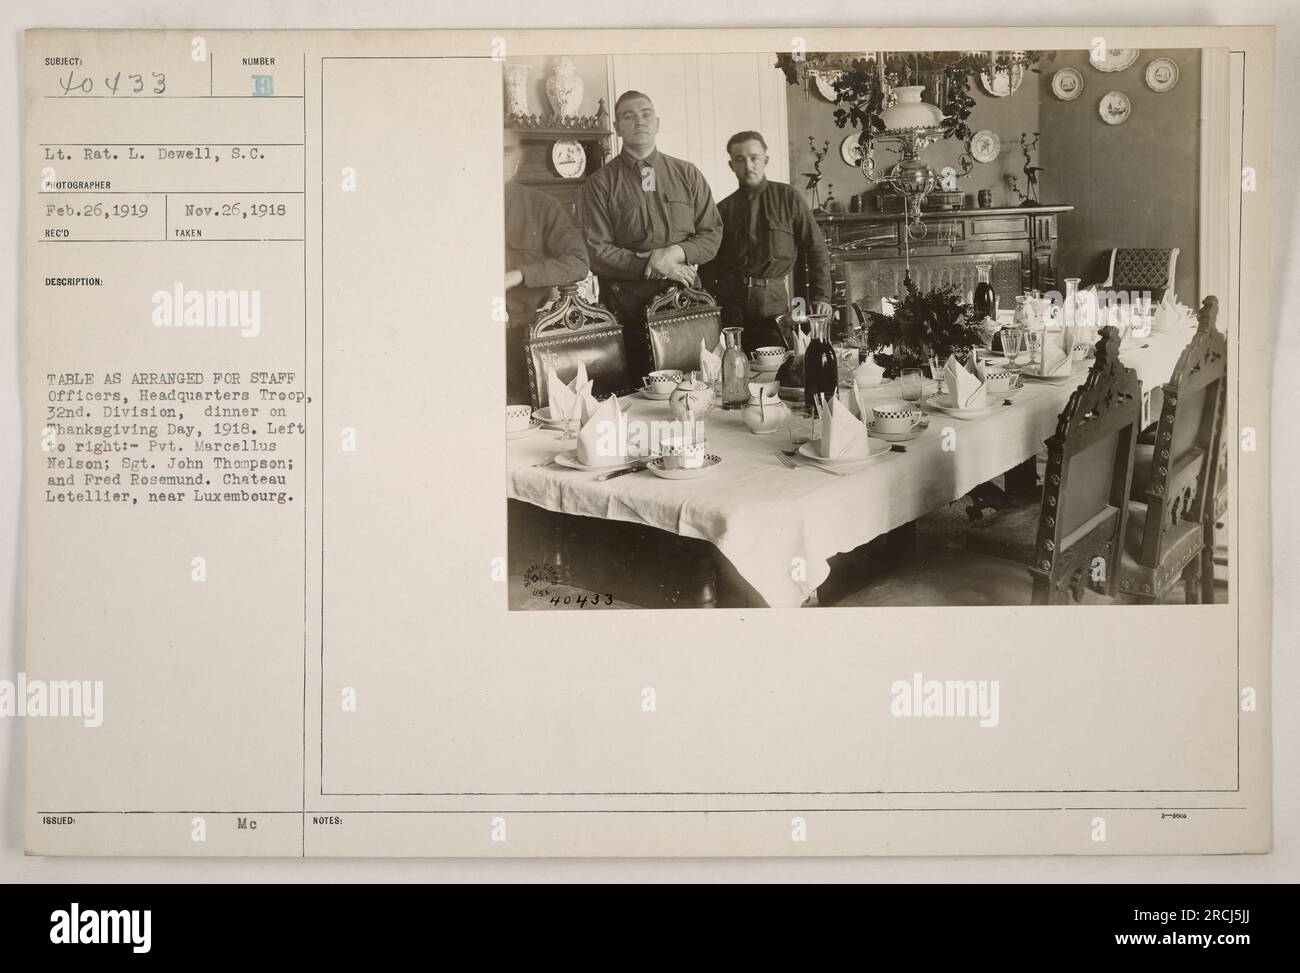 Caption: 'Staff officers from Headquarters Troop, 32nd Division, celebrating Thanksgiving Day with a dinner at Chateau Letellier near Luxembourg. Pictured from left to right: Pvt. Marcellus Nelson, Sgt. John Thompson, and Fred Rosemund. Photo taken on November 26, 1918, by Lt. R. L. Dewell, S.C.' Stock Photo